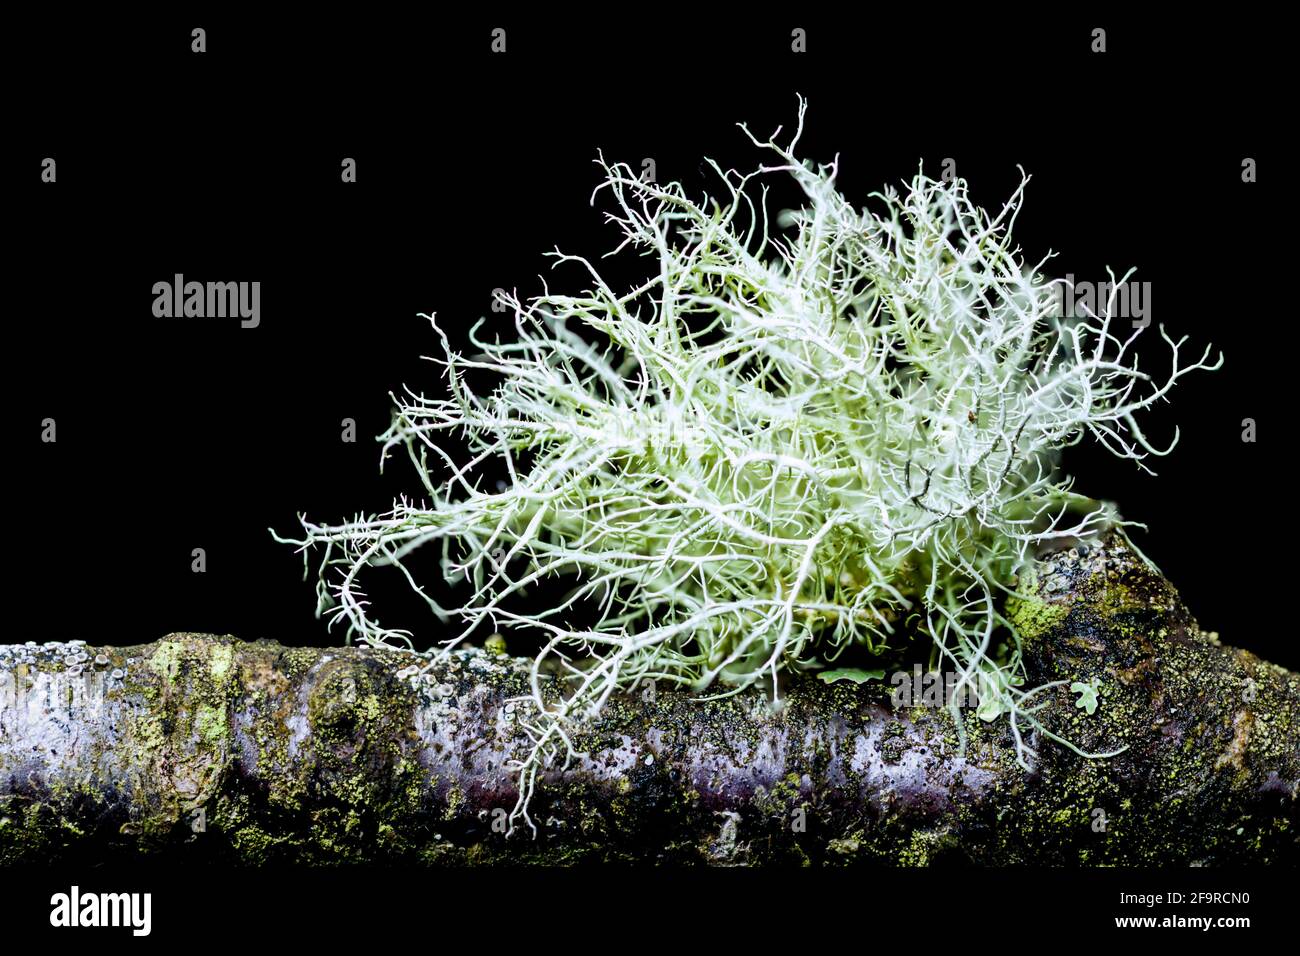 Lichen Usnea subfloridana also known as beard lichen or tree moss. Growing on small tree branches, taken under studio conditions. Stock Photo